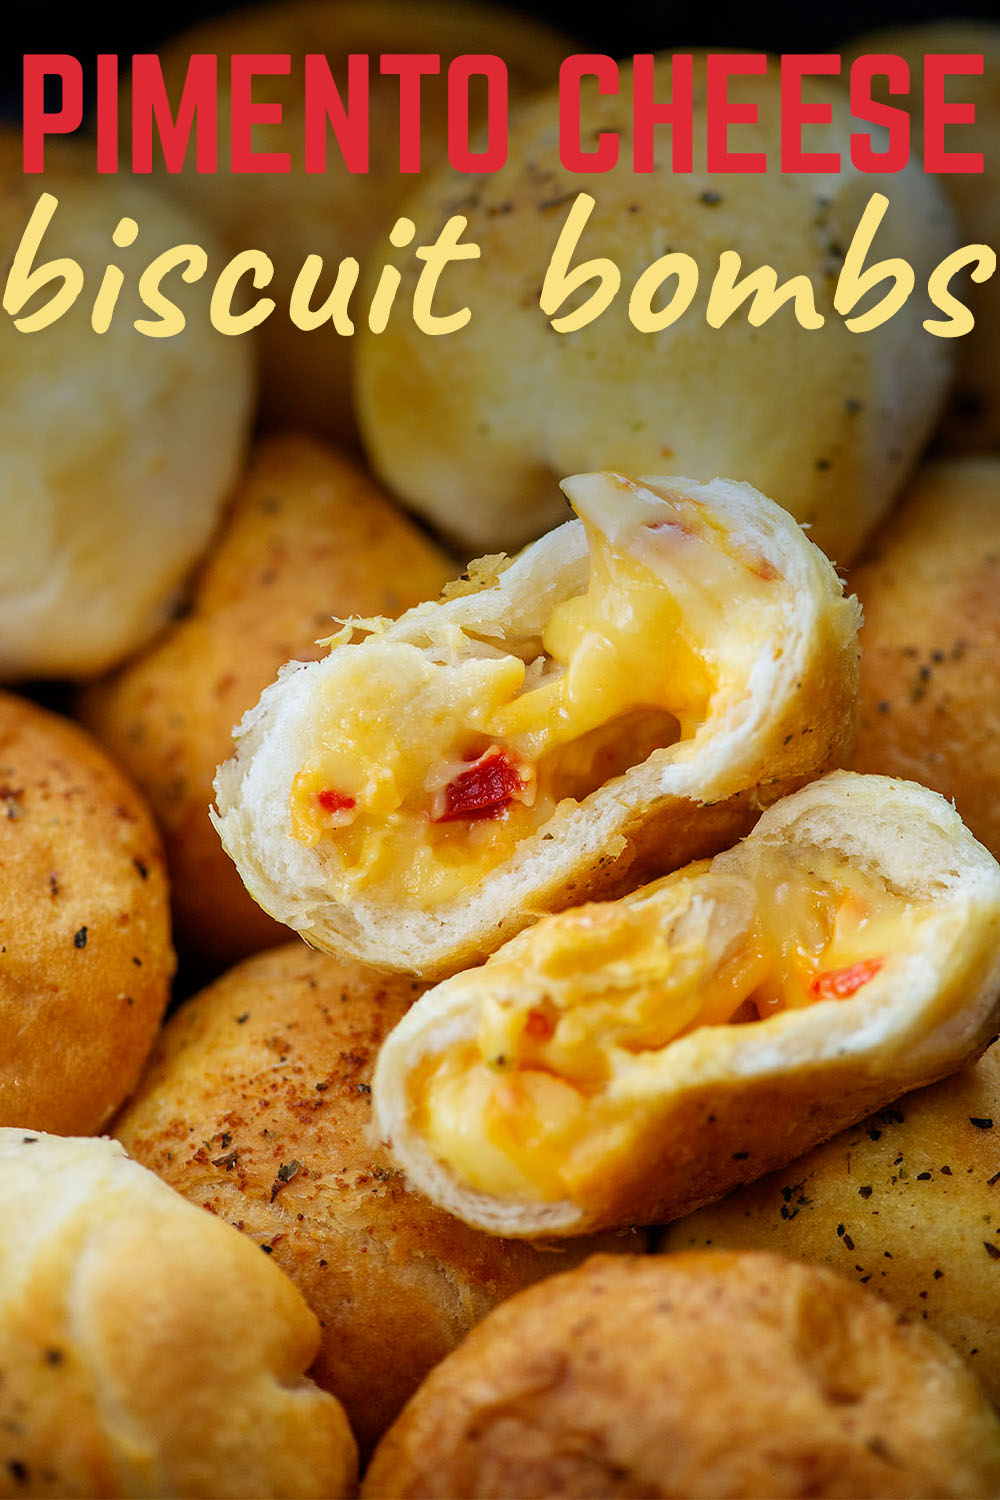 These pimento cheese bombs were super easy to make in our air fryer!